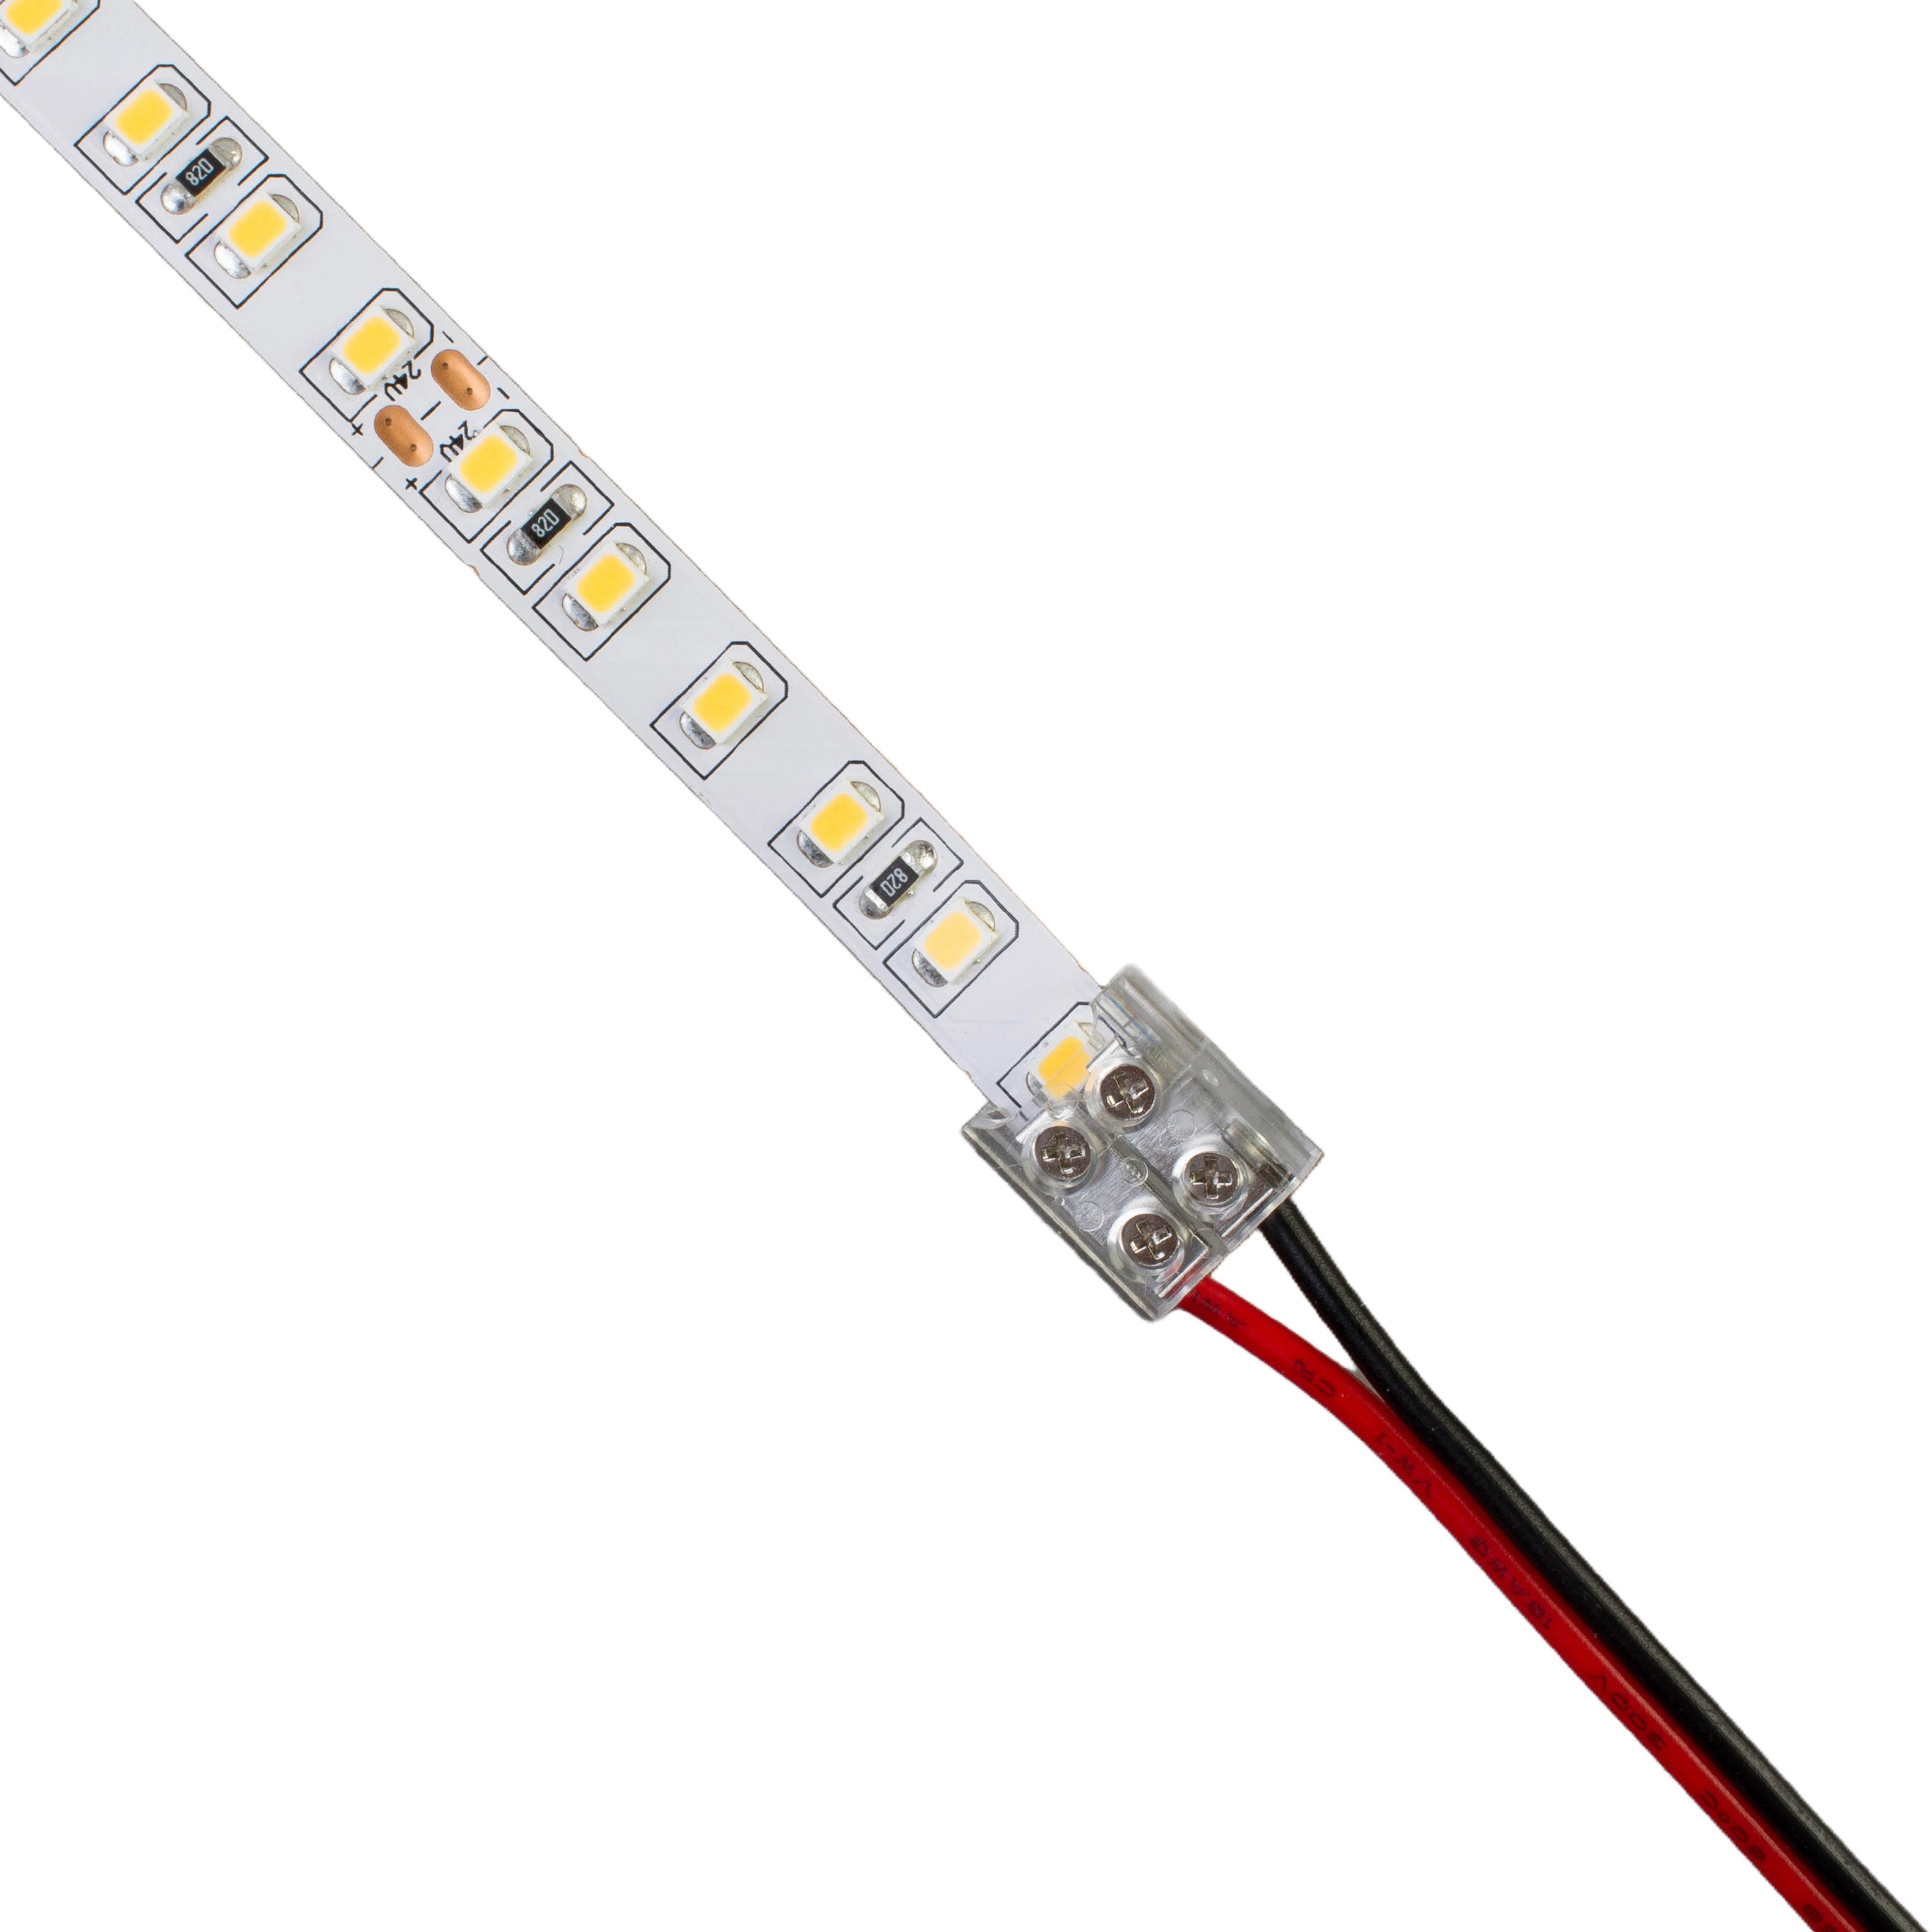 Wire terminal to 10mm LED Strip screw connector